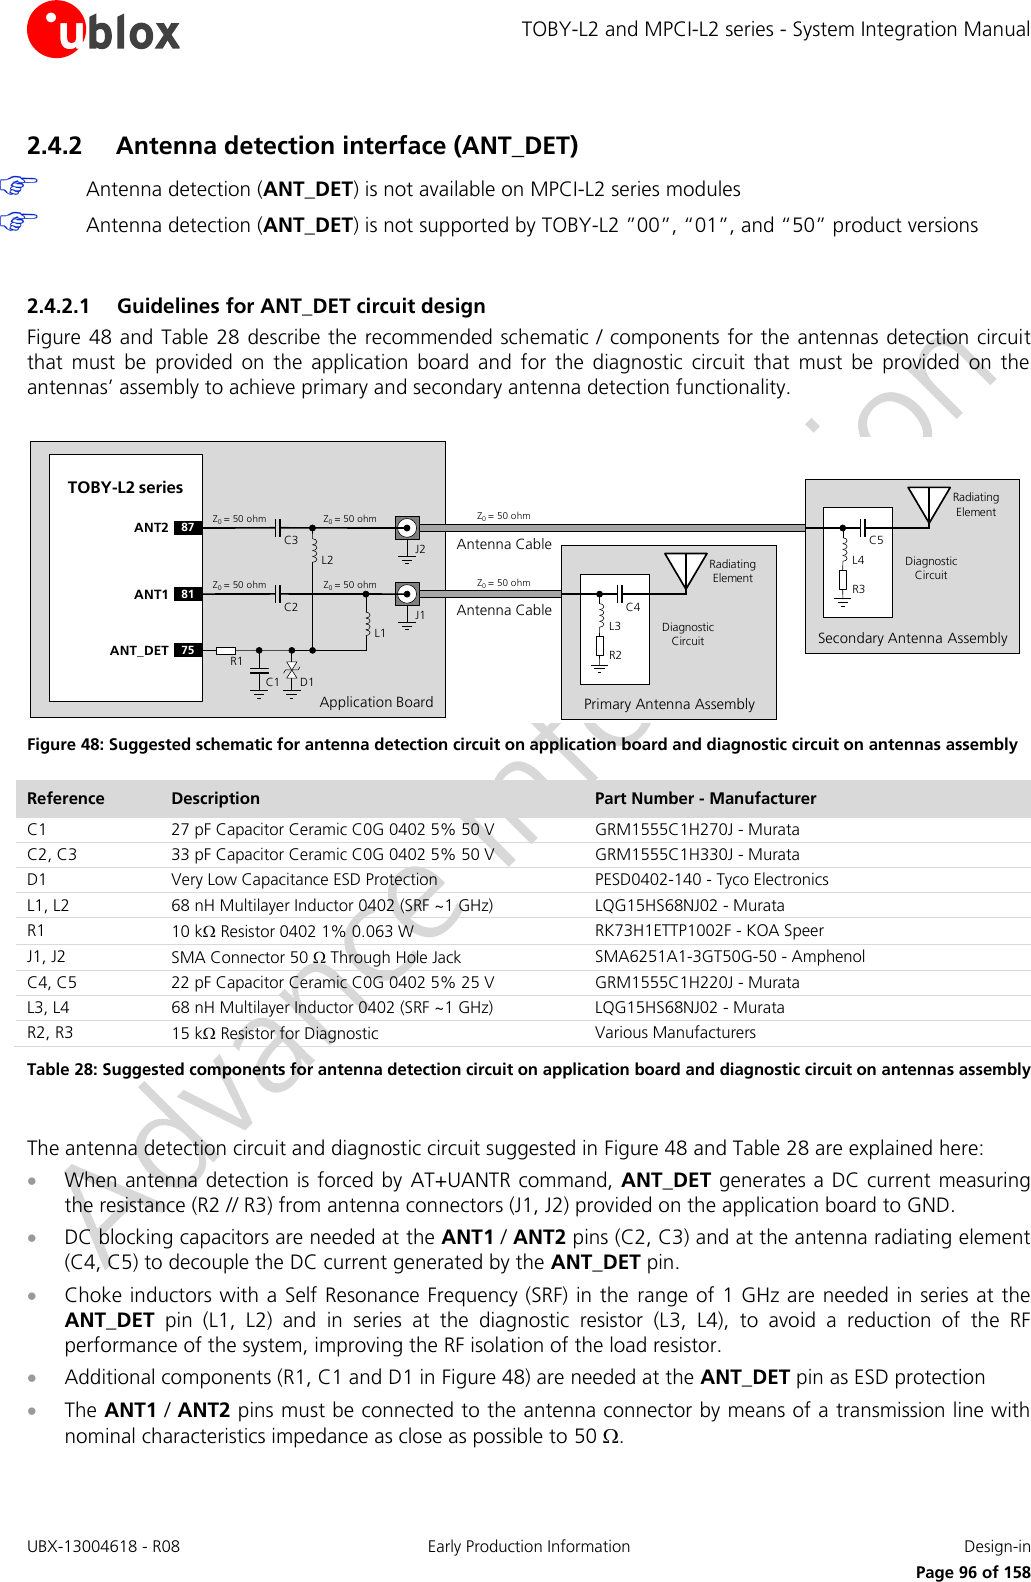 TOBY-L2 and MPCI-L2 series - System Integration Manual UBX-13004618 - R08  Early Production Information  Design-in     Page 96 of 158 2.4.2 Antenna detection interface (ANT_DET)  Antenna detection (ANT_DET) is not available on MPCI-L2 series modules  Antenna detection (ANT_DET) is not supported by TOBY-L2 ”00”, “01”, and “50” product versions  2.4.2.1 Guidelines for ANT_DET circuit design Figure 48 and Table 28 describe the recommended schematic / components for the antennas detection circuit that  must  be  provided  on  the  application  board  and  for  the  diagnostic  circuit  that  must  be  provided  on  the antennas’ assembly to achieve primary and secondary antenna detection functionality.  Application BoardAntenna CableTOBY-L2 series81ANT175ANT_DET R1C1 D1C2 J1Z0= 50 ohm Z0= 50 ohm Z0= 50 ohmPrimary Antenna AssemblyR2C4L3Radiating ElementDiagnostic CircuitL2L1Antenna Cable87ANT2C3 J2Z0= 50 ohm Z0= 50 ohm Z0= 50 ohmSecondary Antenna AssemblyR3C5L4Radiating ElementDiagnostic Circuit Figure 48: Suggested schematic for antenna detection circuit on application board and diagnostic circuit on antennas assembly Reference Description Part Number - Manufacturer C1 27 pF Capacitor Ceramic C0G 0402 5% 50 V GRM1555C1H270J - Murata C2, C3 33 pF Capacitor Ceramic C0G 0402 5% 50 V GRM1555C1H330J - Murata D1 Very Low Capacitance ESD Protection PESD0402-140 - Tyco Electronics L1, L2 68 nH Multilayer Inductor 0402 (SRF ~1 GHz) LQG15HS68NJ02 - Murata R1 10 k Resistor 0402 1% 0.063 W RK73H1ETTP1002F - KOA Speer J1, J2 SMA Connector 50  Through Hole Jack SMA6251A1-3GT50G-50 - Amphenol C4, C5 22 pF Capacitor Ceramic C0G 0402 5% 25 V  GRM1555C1H220J - Murata L3, L4 68 nH Multilayer Inductor 0402 (SRF ~1 GHz) LQG15HS68NJ02 - Murata R2, R3 15 k Resistor for Diagnostic Various Manufacturers Table 28: Suggested components for antenna detection circuit on application board and diagnostic circuit on antennas assembly  The antenna detection circuit and diagnostic circuit suggested in Figure 48 and Table 28 are explained here:  When antenna detection is forced by AT+UANTR command, ANT_DET generates a DC current measuring the resistance (R2 // R3) from antenna connectors (J1, J2) provided on the application board to GND.  DC blocking capacitors are needed at the ANT1 / ANT2 pins (C2, C3) and at the antenna radiating element (C4, C5) to decouple the DC current generated by the ANT_DET pin.  Choke inductors with a Self Resonance Frequency (SRF) in the range of 1 GHz are needed in series at the ANT_DET  pin  (L1,  L2)  and  in  series  at  the  diagnostic  resistor  (L3,  L4),  to  avoid  a  reduction  of  the  RF performance of the system, improving the RF isolation of the load resistor.   Additional components (R1, C1 and D1 in Figure 48) are needed at the ANT_DET pin as ESD protection  The ANT1 / ANT2 pins must be connected to the antenna connector by means of a transmission line with nominal characteristics impedance as close as possible to 50 .  